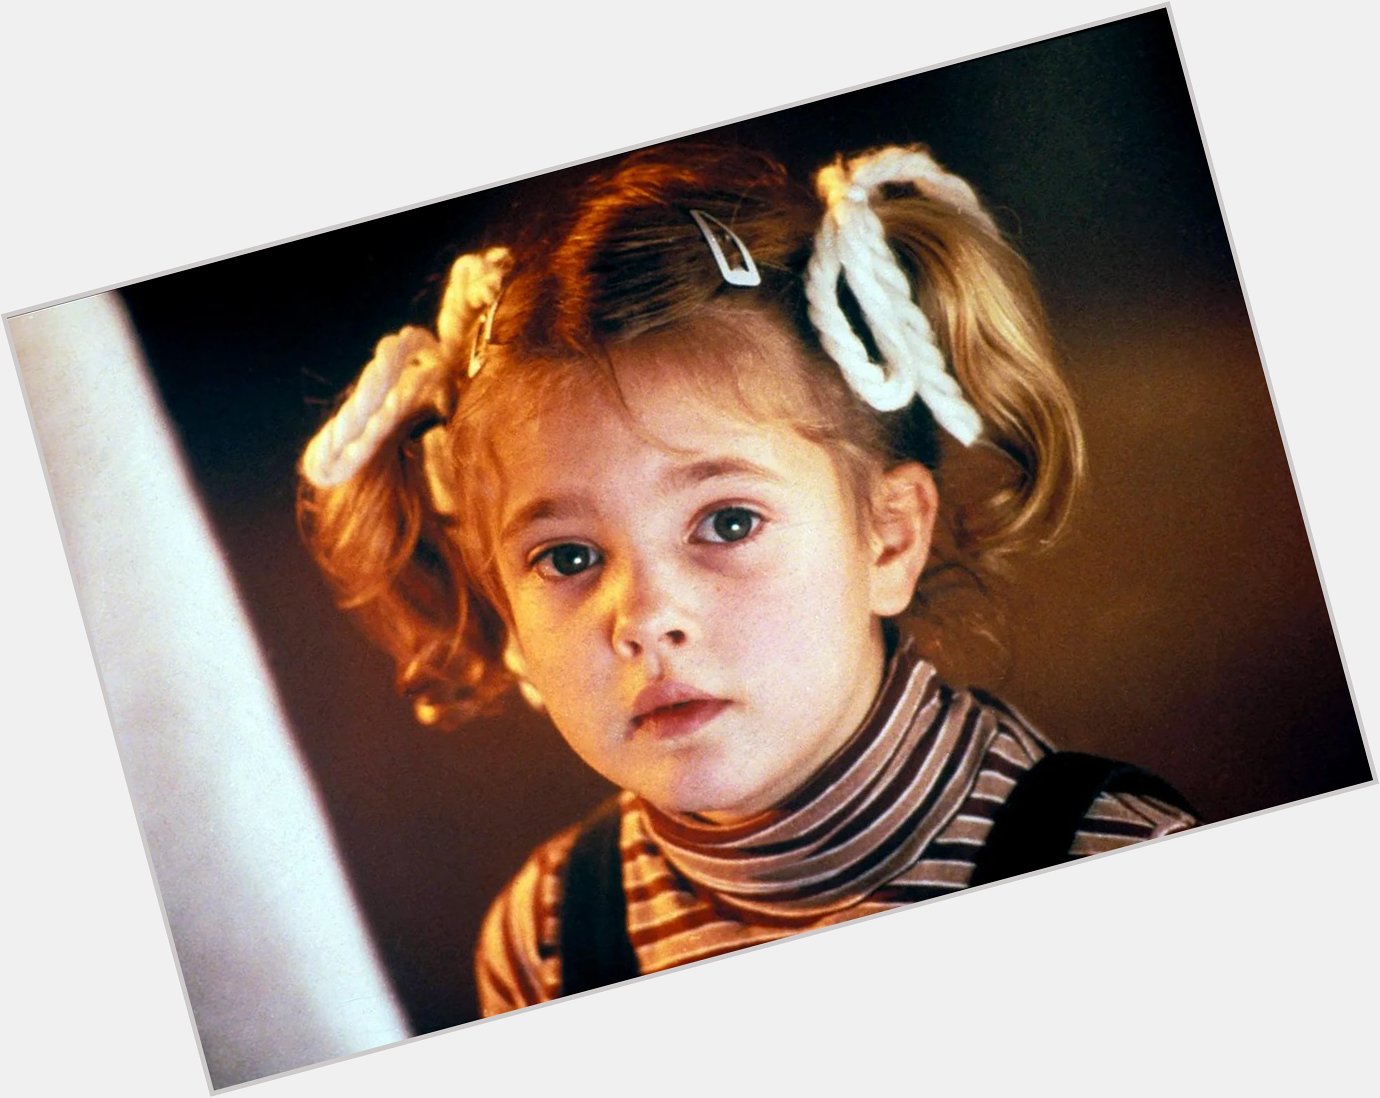 Happy Birthday to Drew Barrymore, here in E.T. THE EXTRA-TERRESTRIAL! 